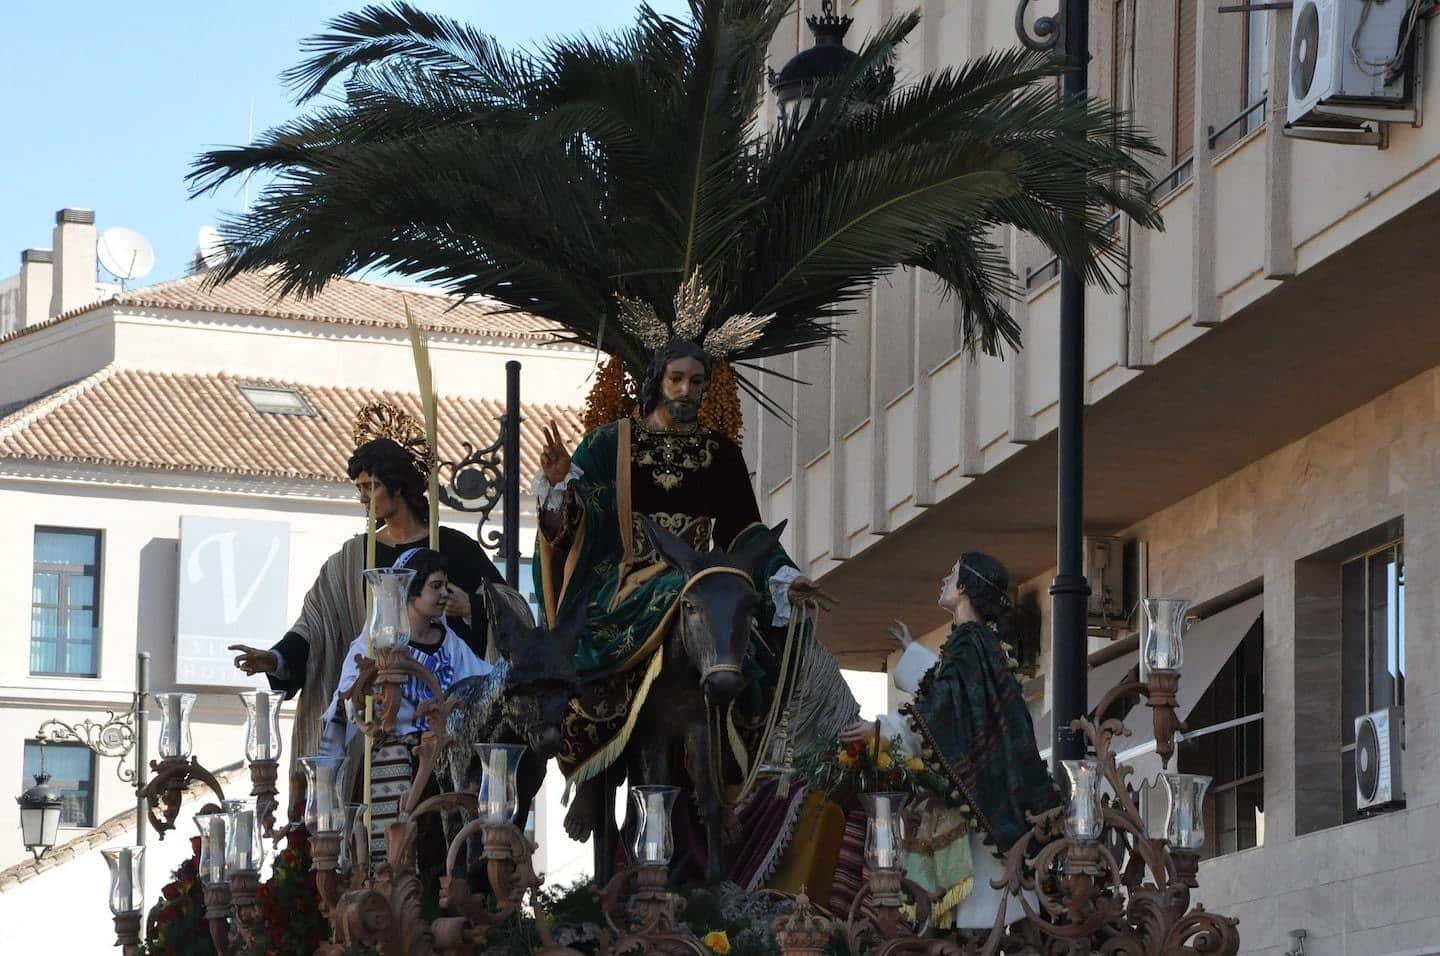 procession of religious figures for Semana Santa Holy Week in Spain